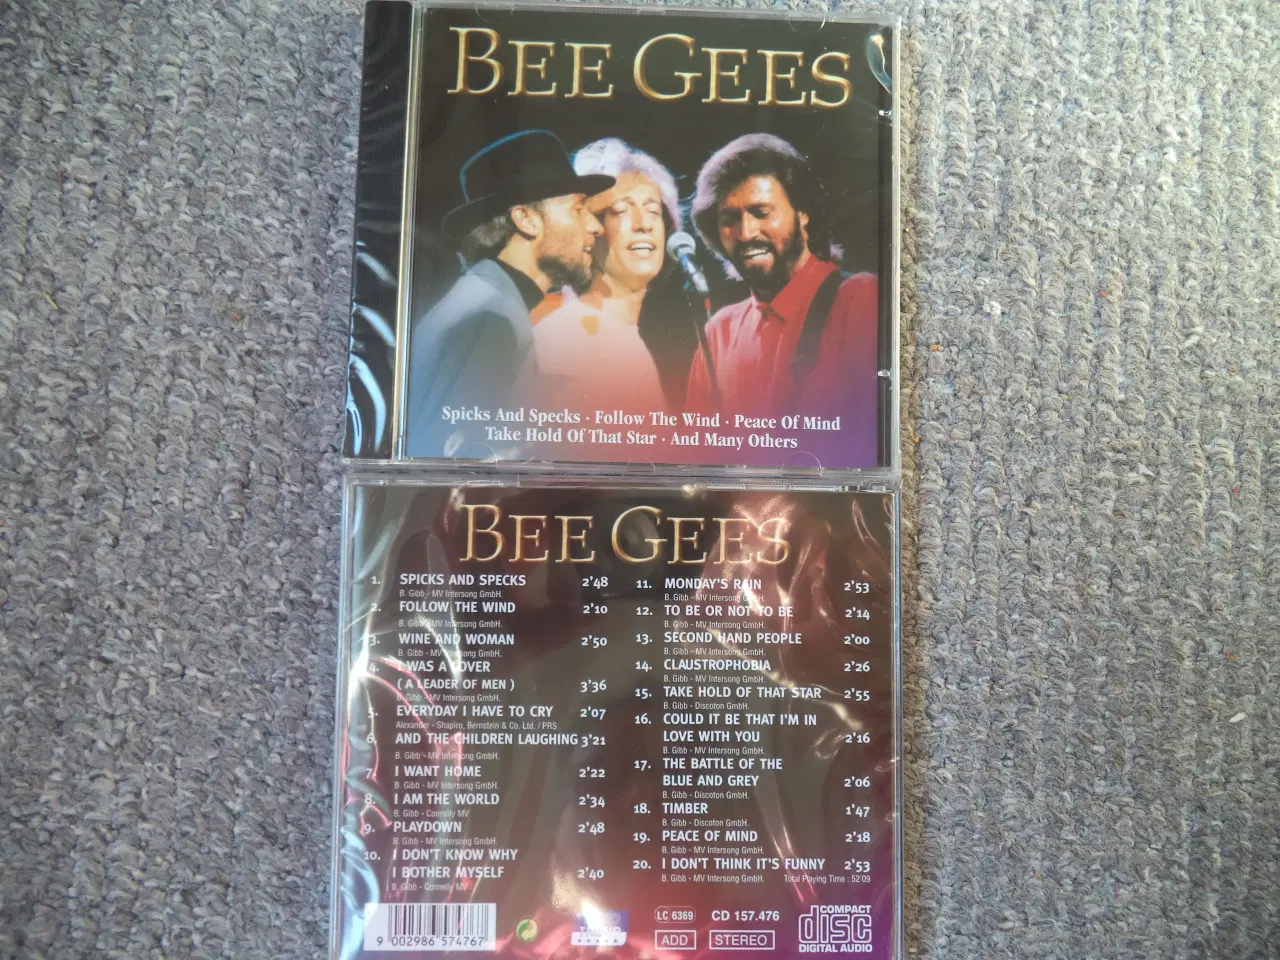 Billede 1 - BEE GEES ** The Bee Gees (cd 157.476) (NY I folie)